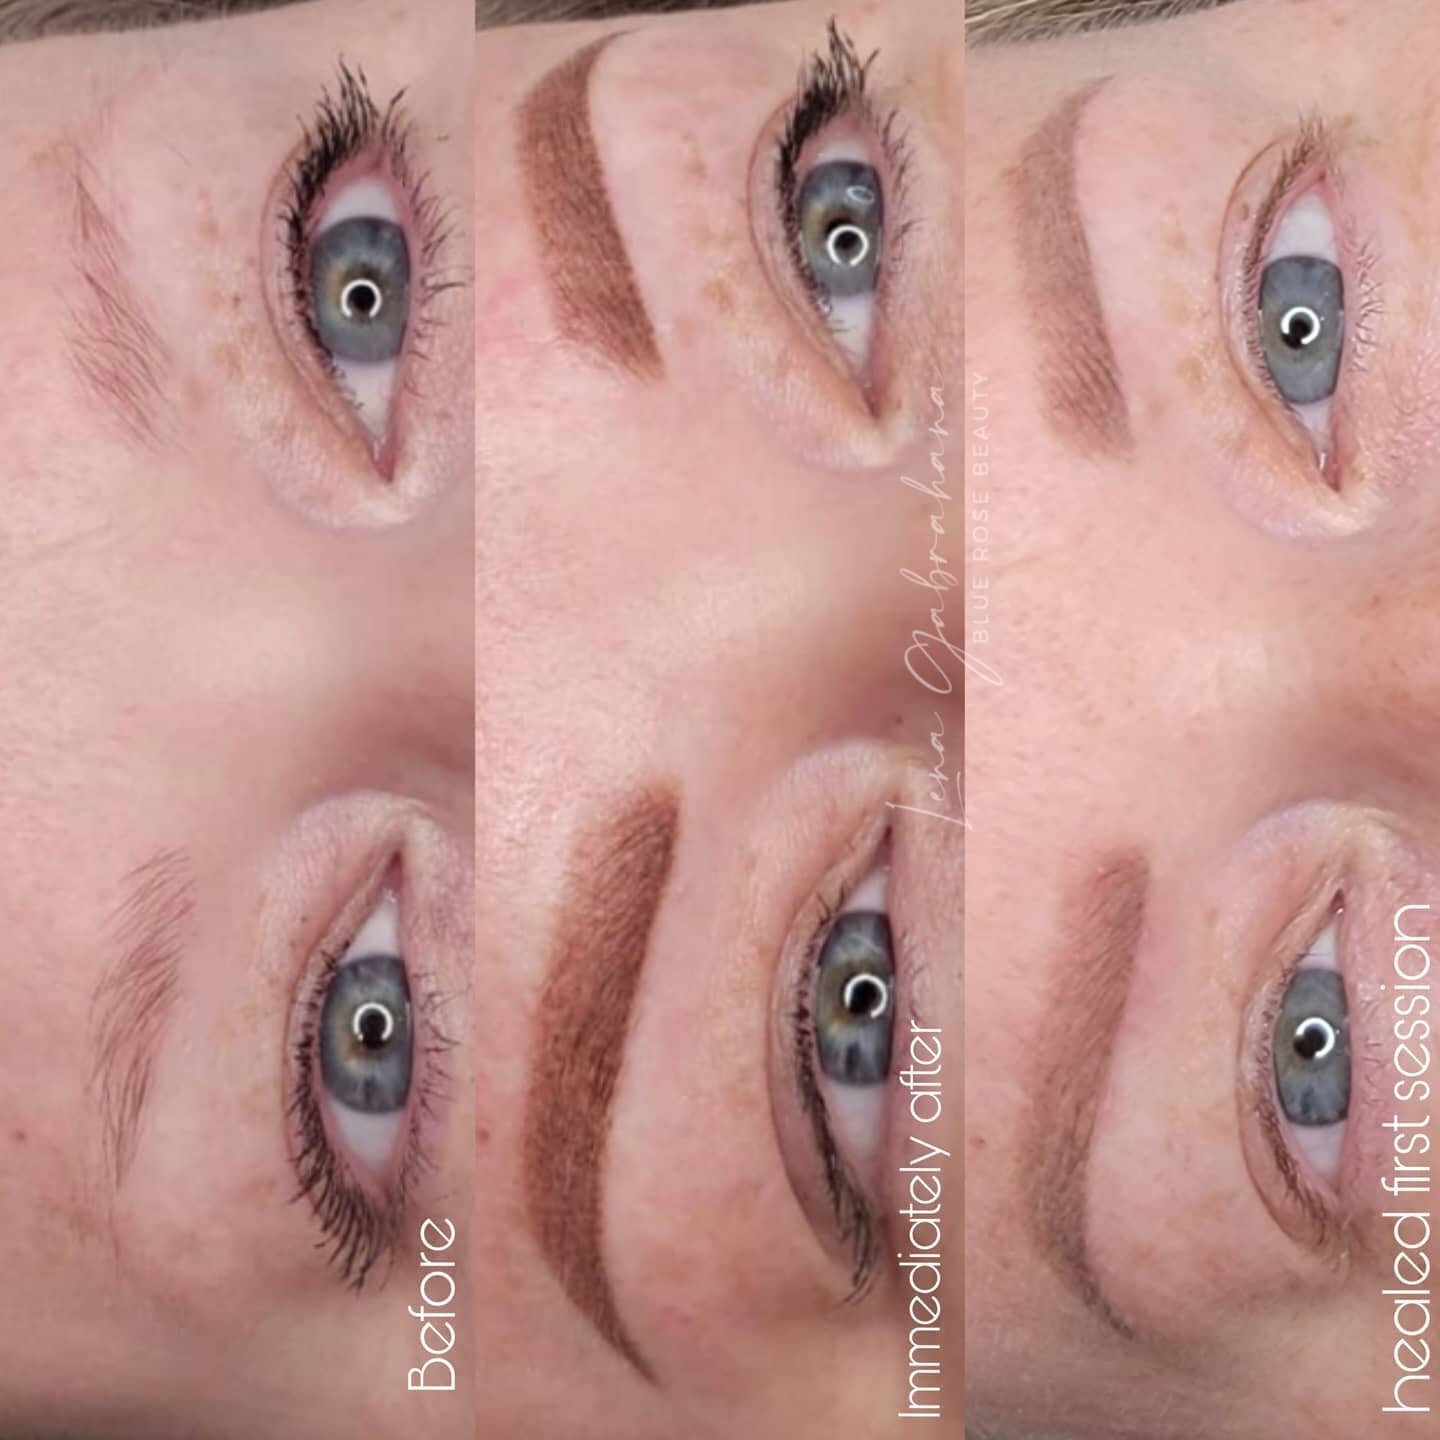 Often it is hard for clients to envision how soft &amp; beautiful their brows will be once healed as they can be very bright + vibrant when first done. 

Powder Brows typically soften + fade 20- 30% leaving the client with a soft beautiful dusty brow